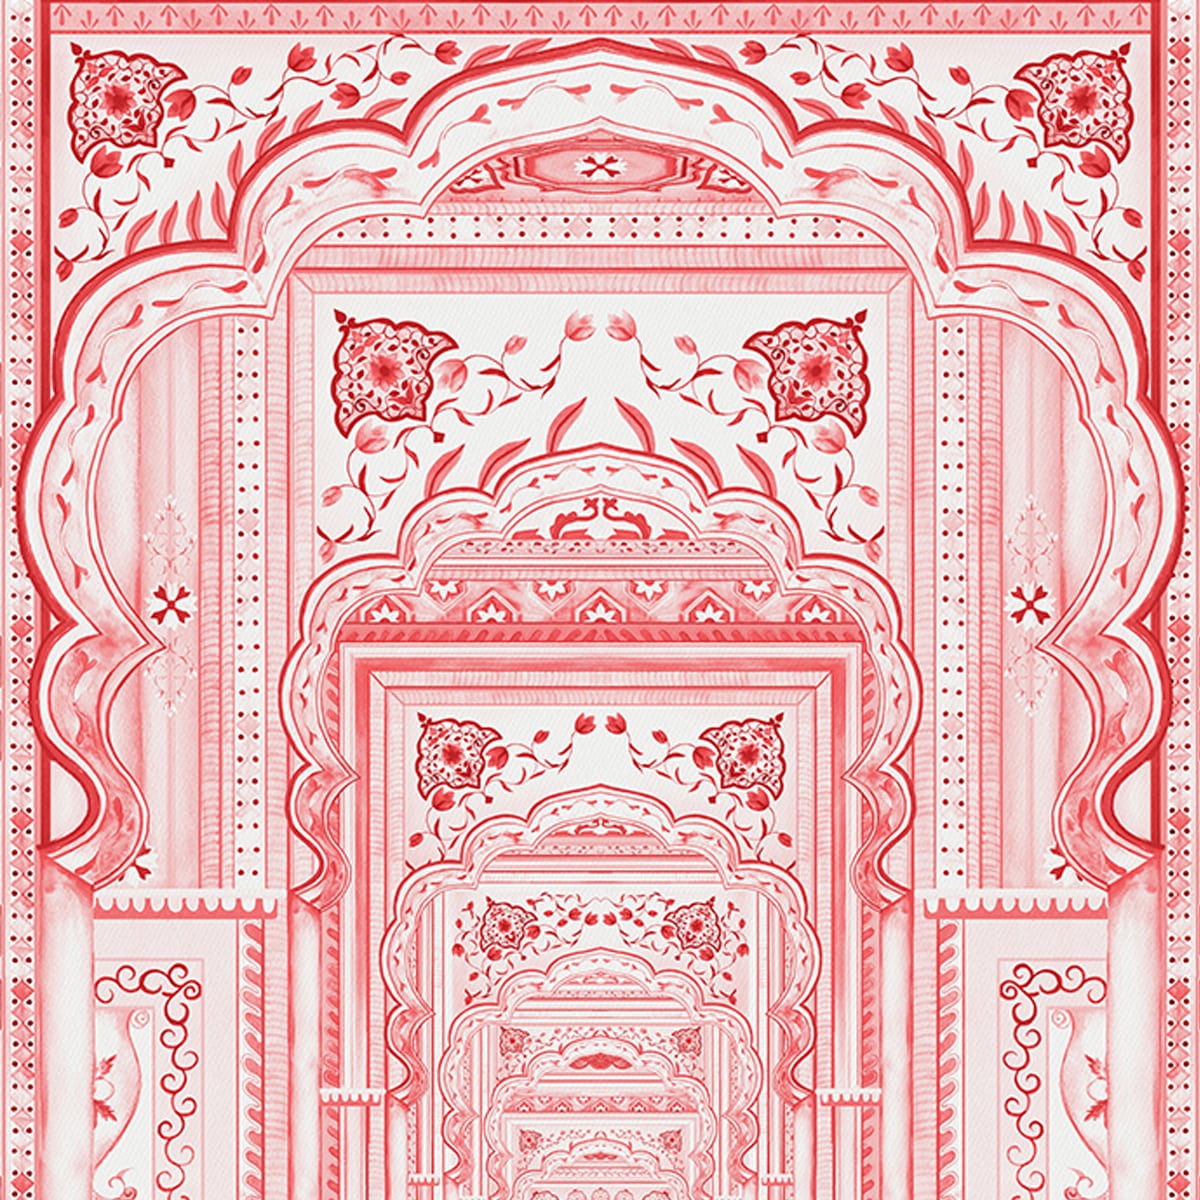 Dilli Darbar, Wallpaper in Suneherii Collection, Crimson Red, Customised